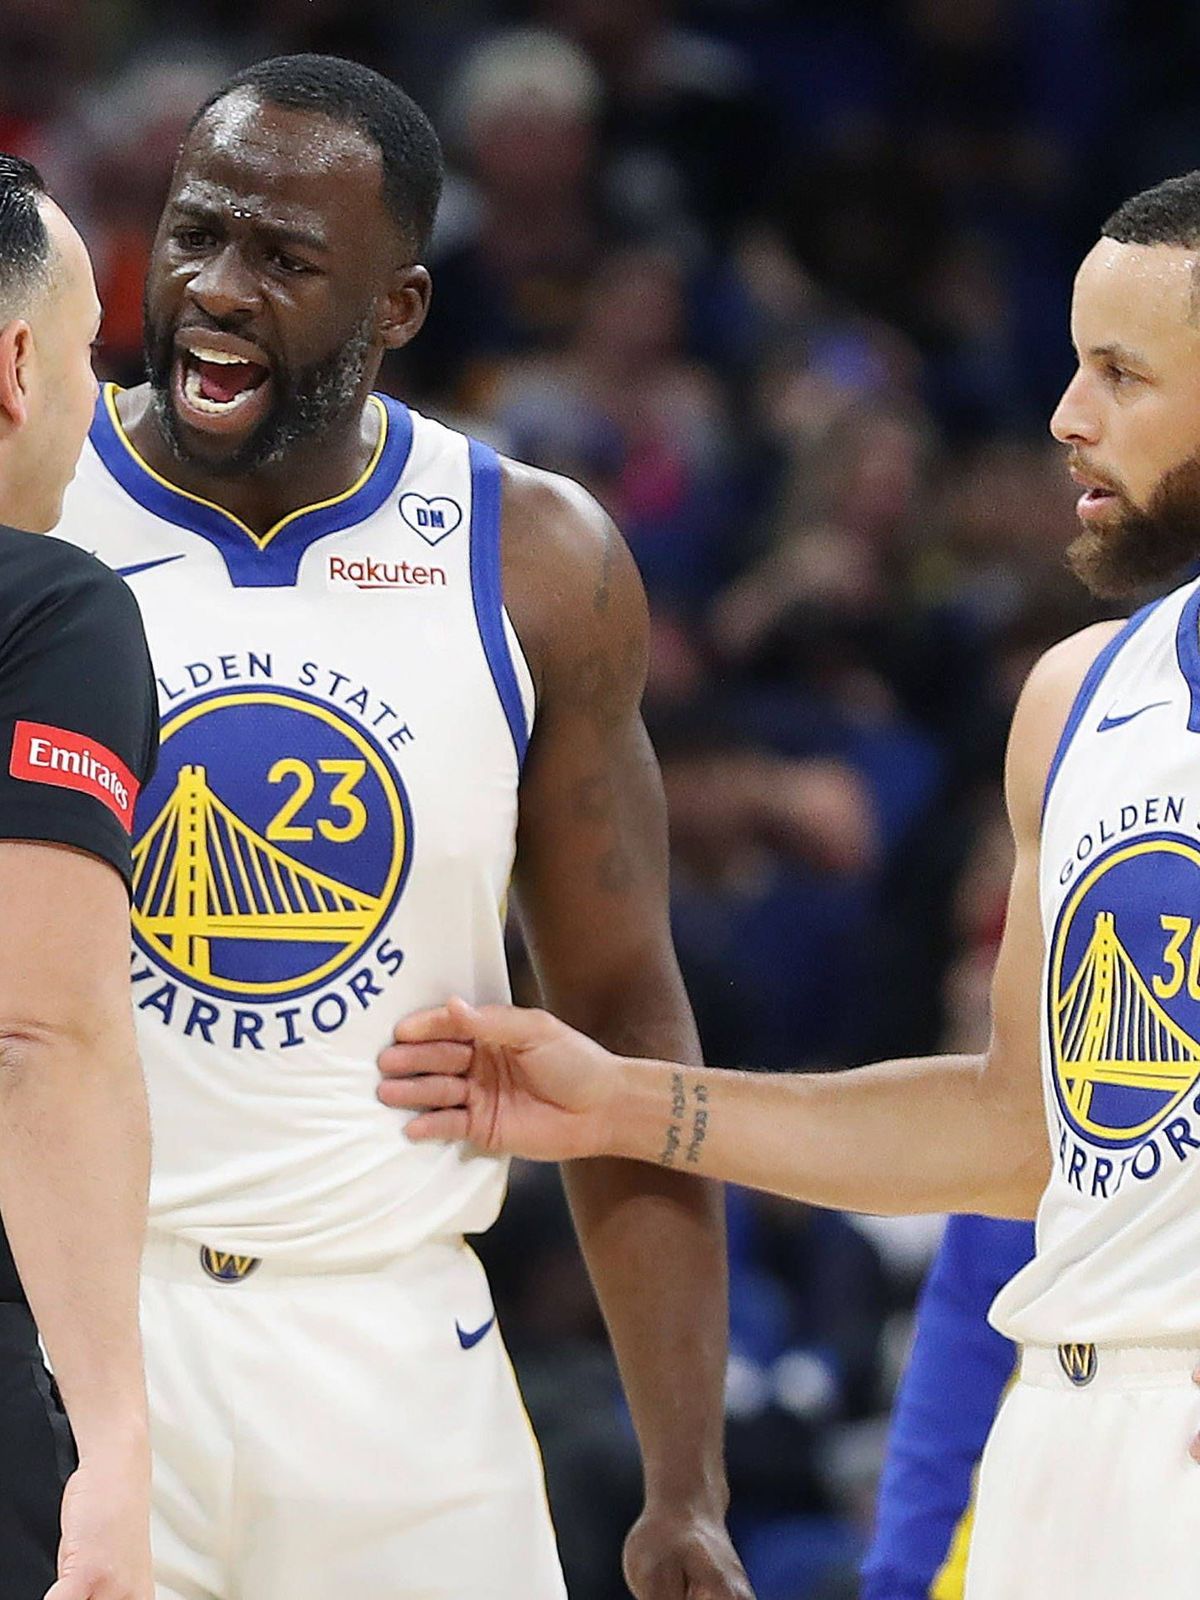 SPORTS-BKN-WARRIORS-MAGIC-1-OS The Golden State Warriors Draymond Green (23) screams at game official Ray Acosta (54) as teammate Stephen Curry (30) steps in at right during action against the Orla...